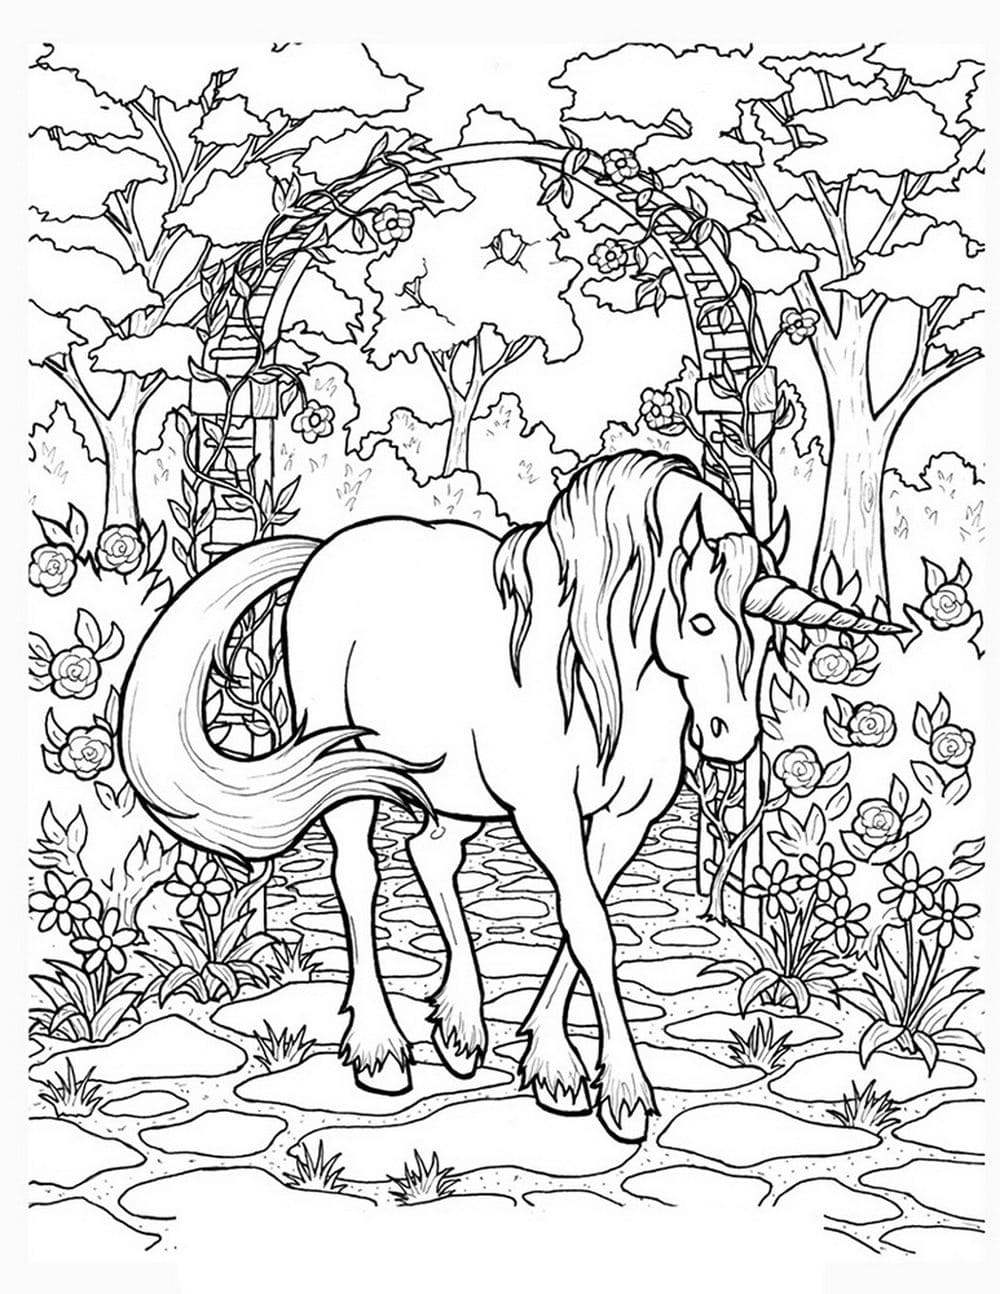 Unicorn In The Garden Coloring Page Free Printable Coloring